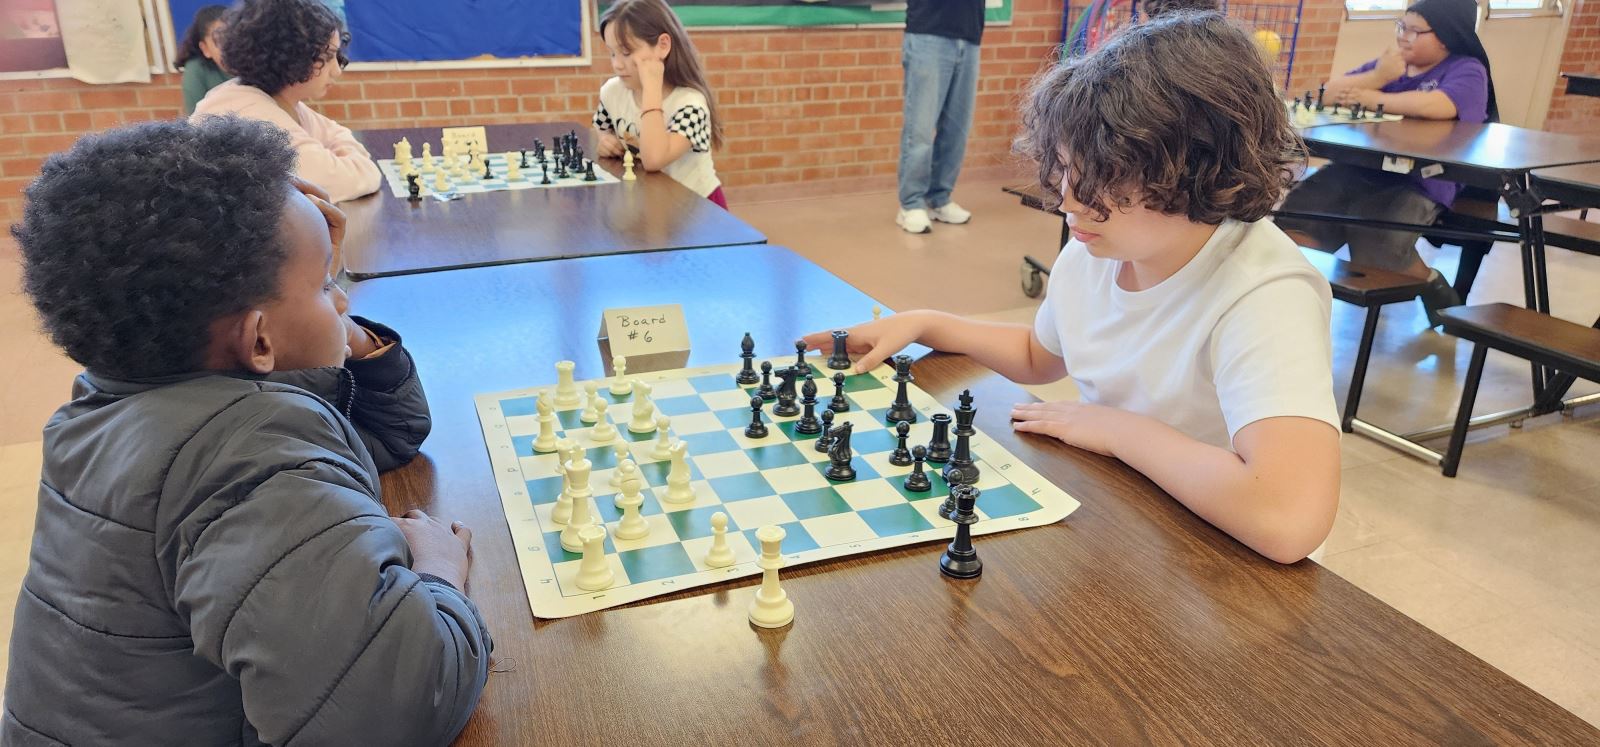 Two boys play chess